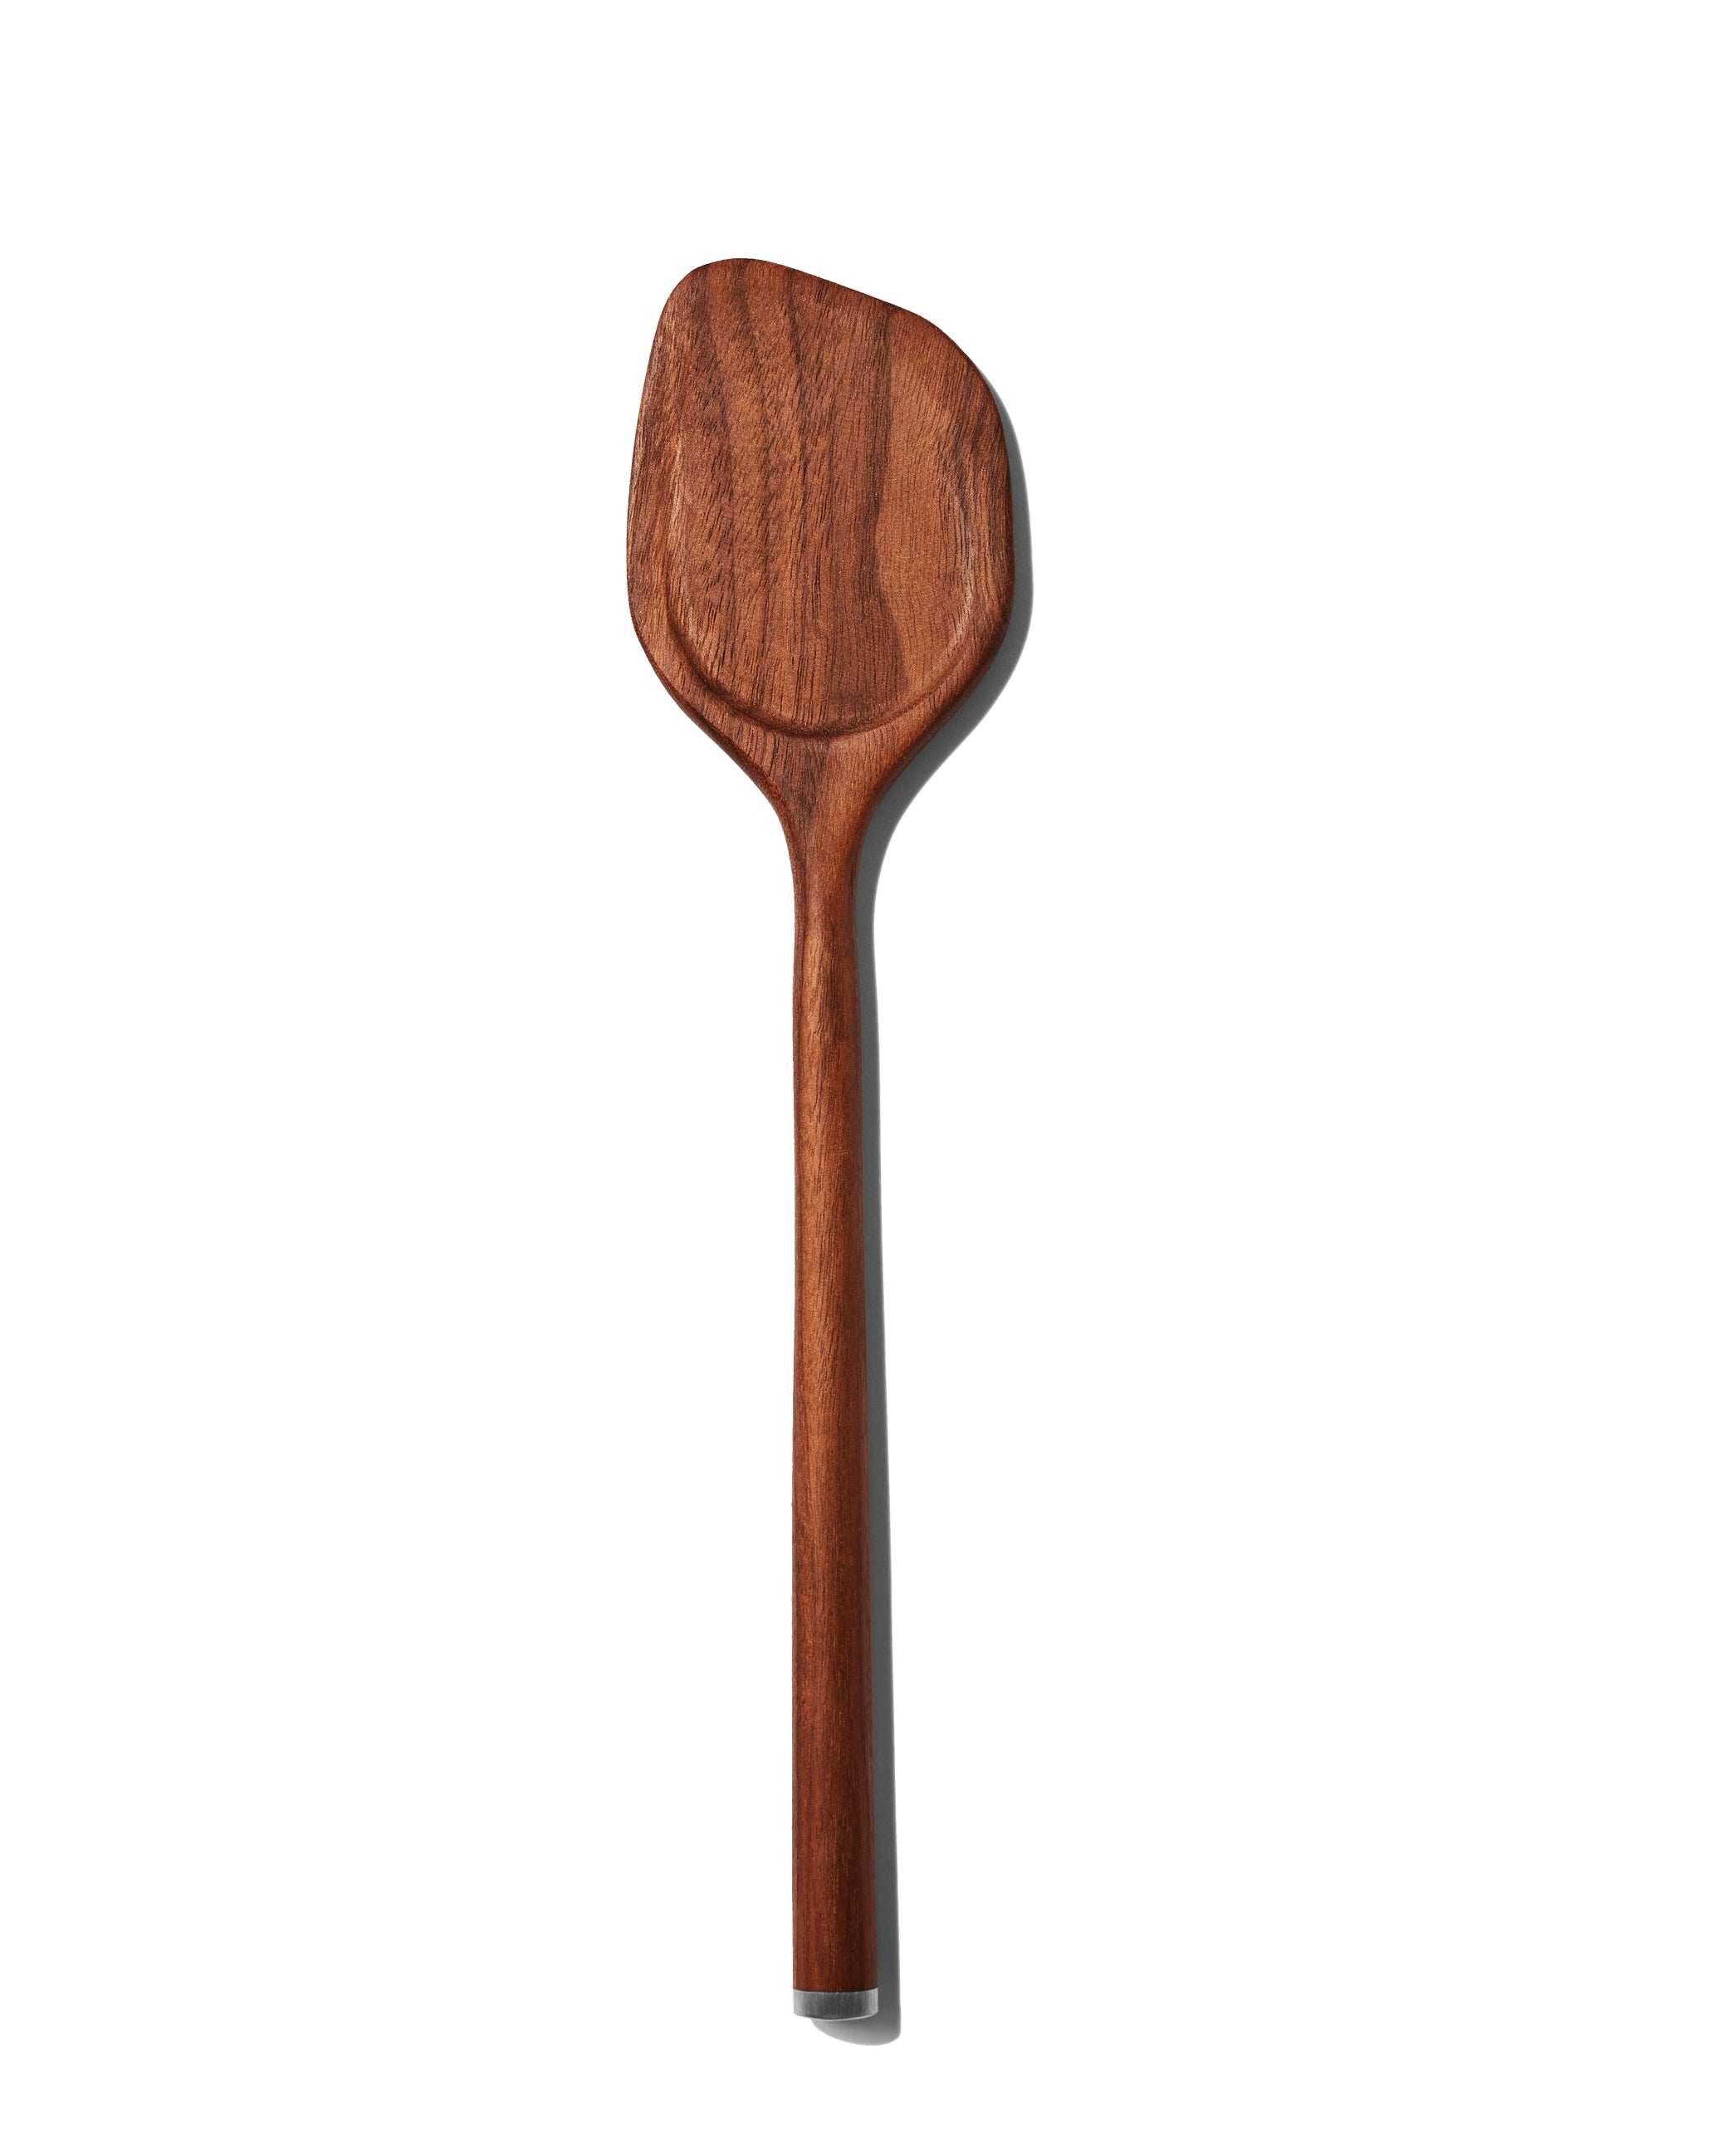 The Wood Spoon